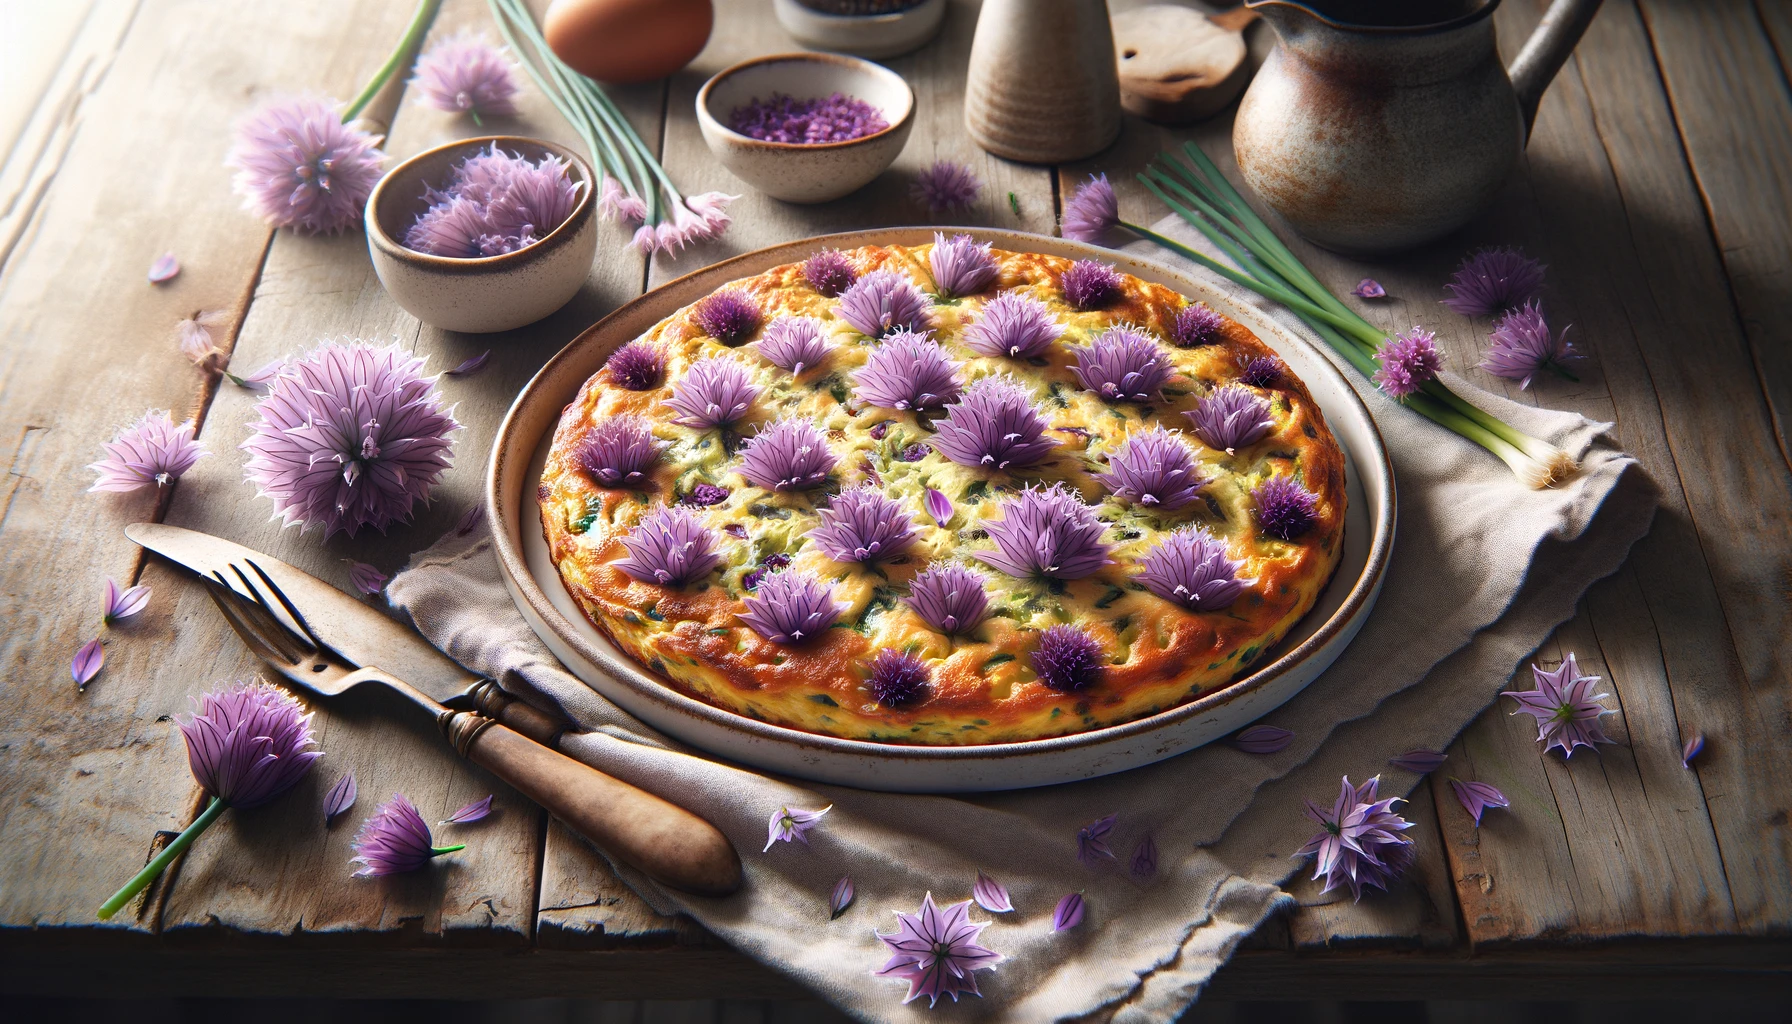 Chive quiche with edible chive flowers on rustic table.